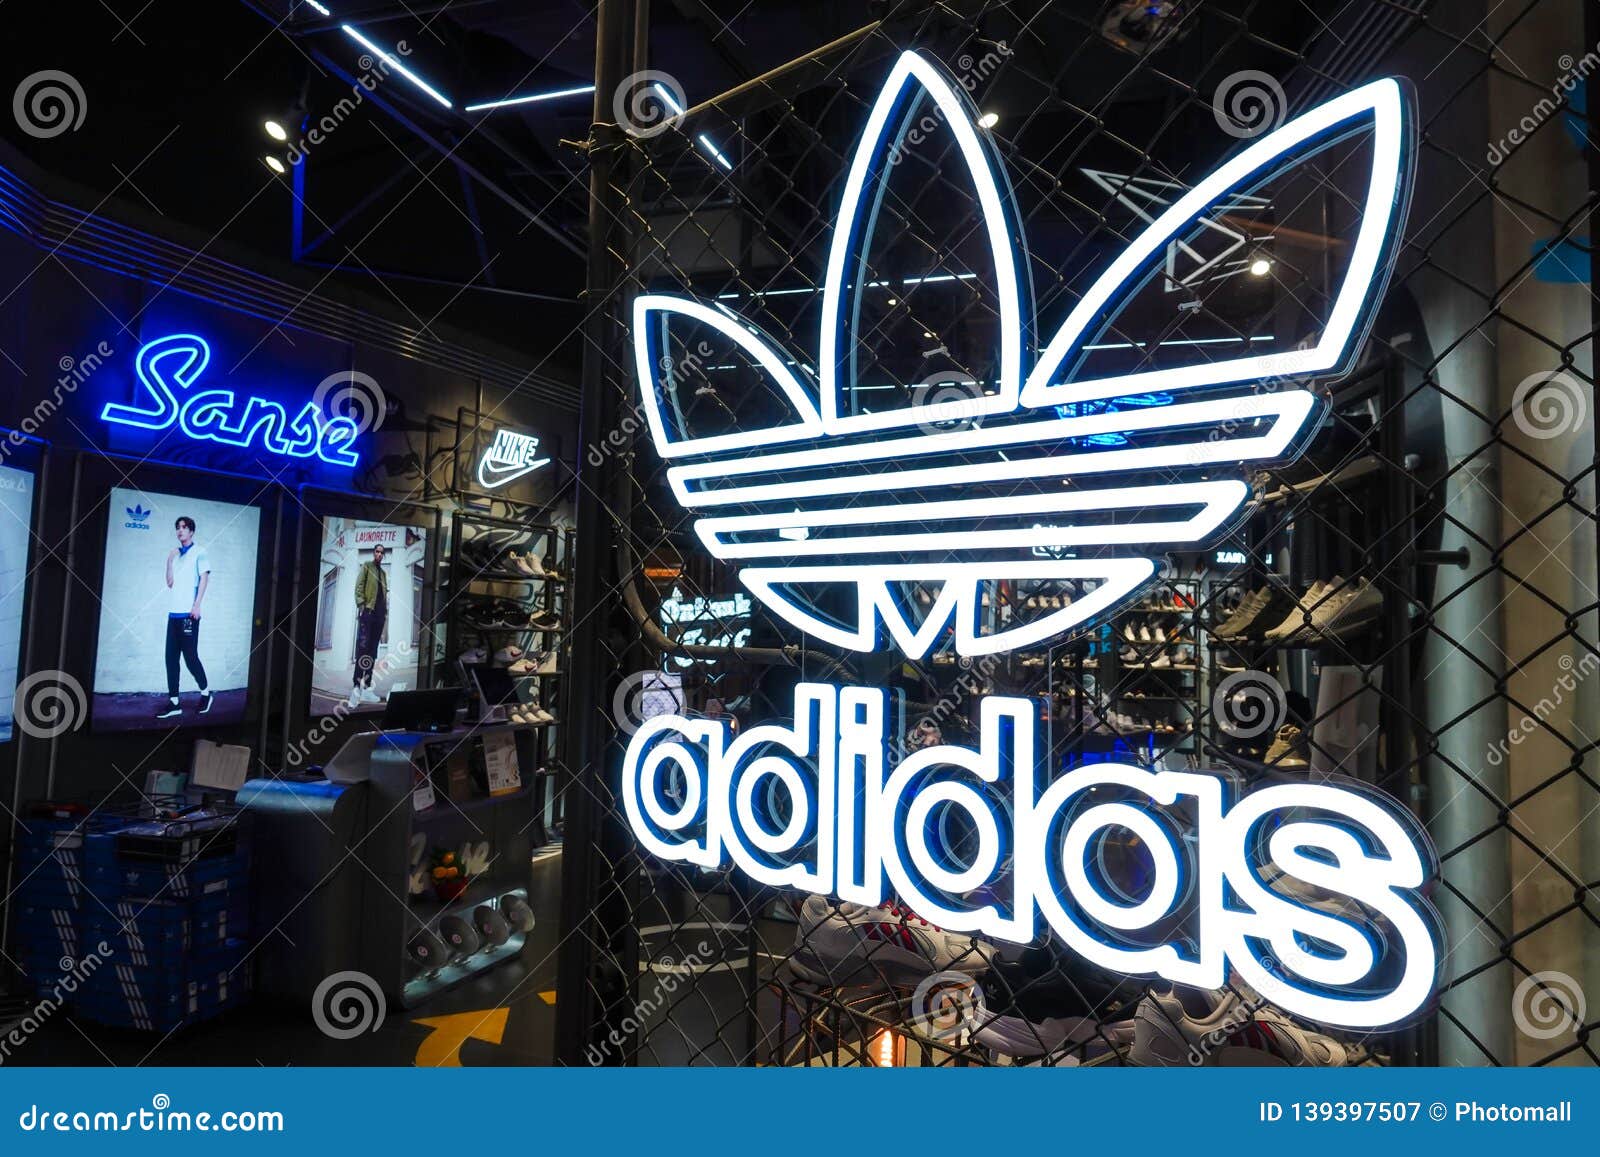 adidas sign in